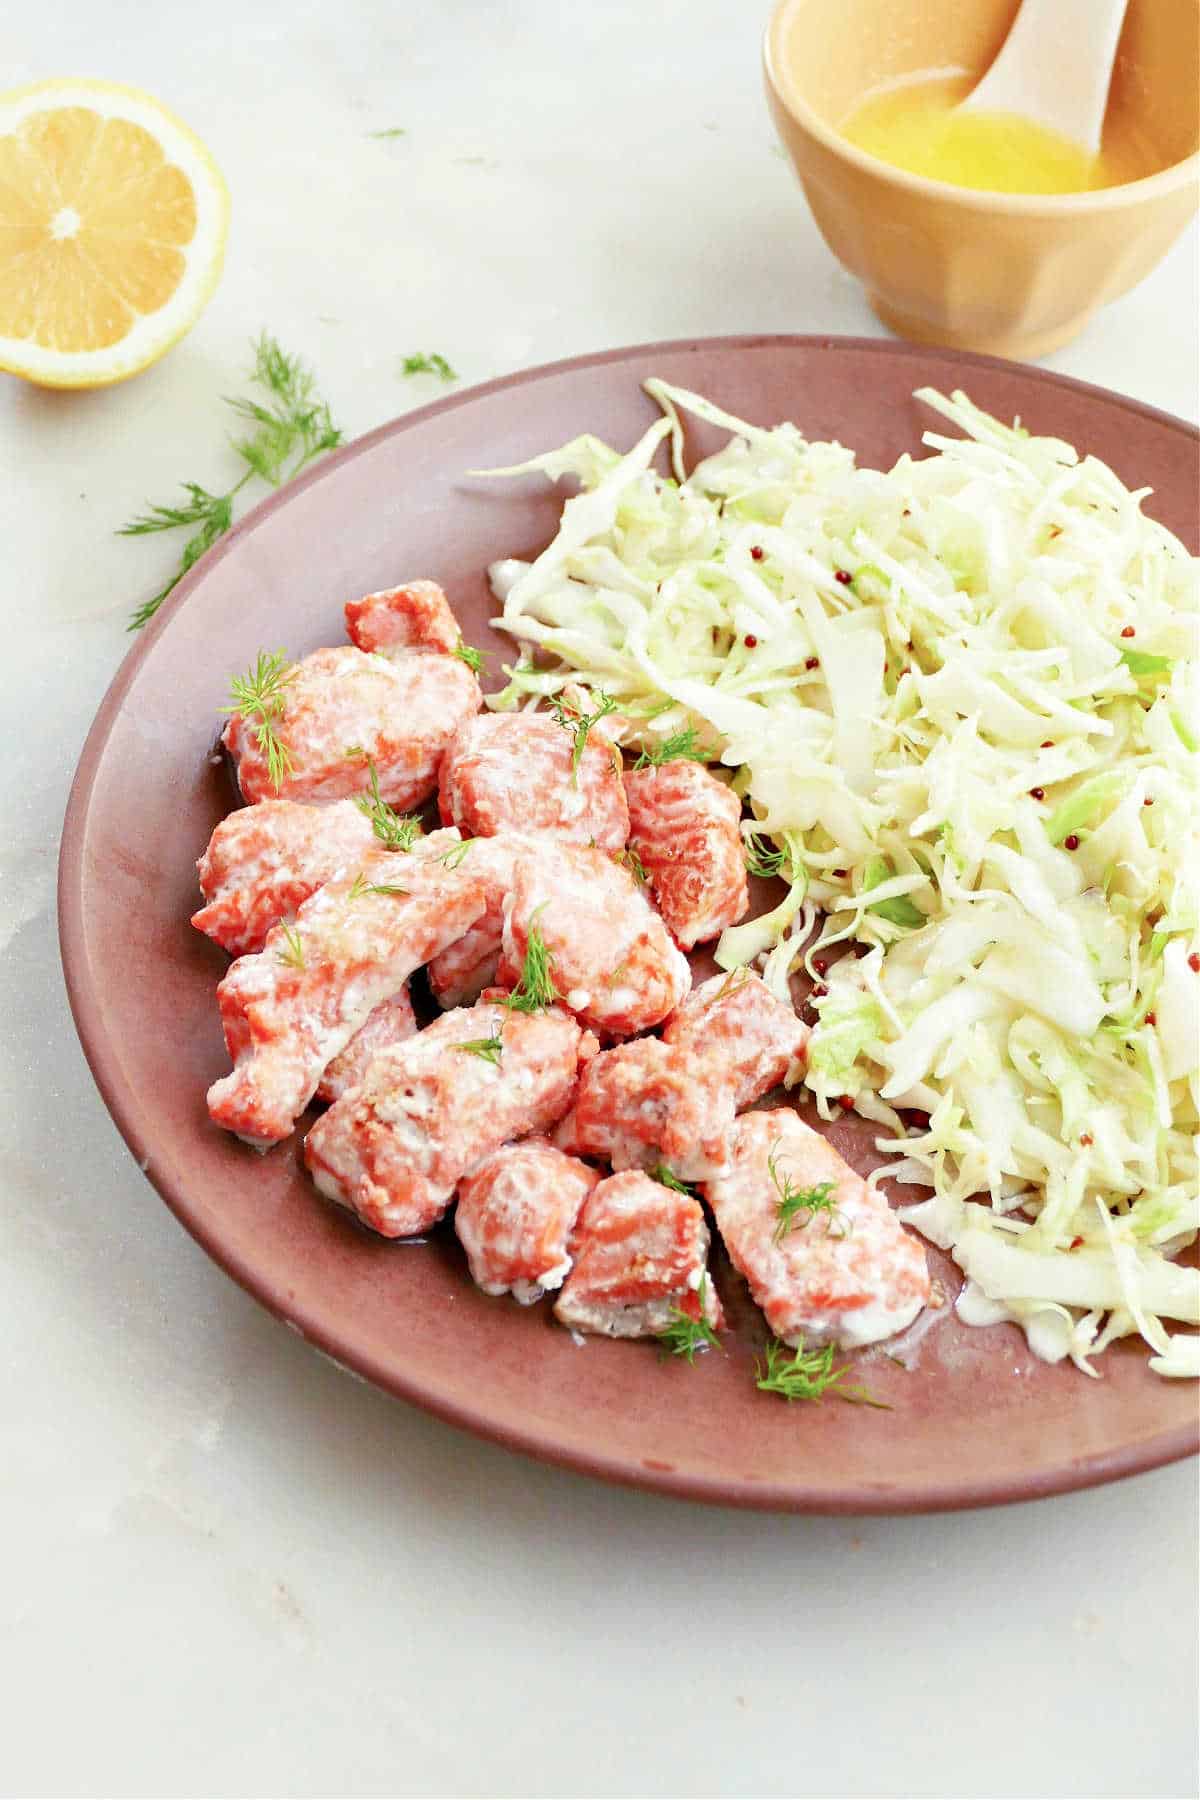 lemon butter salmon bites and coleslaw on a plate next to ingredients